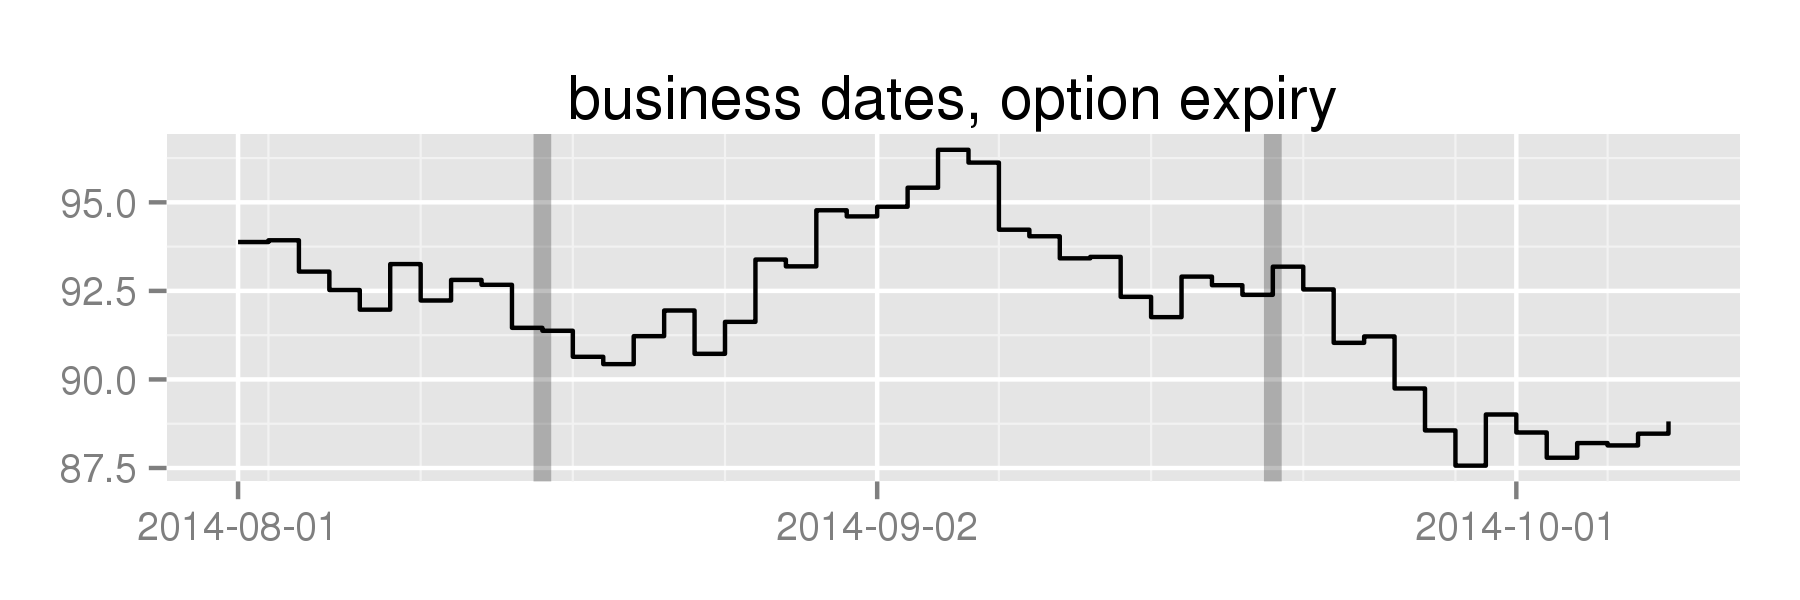 business dates with options